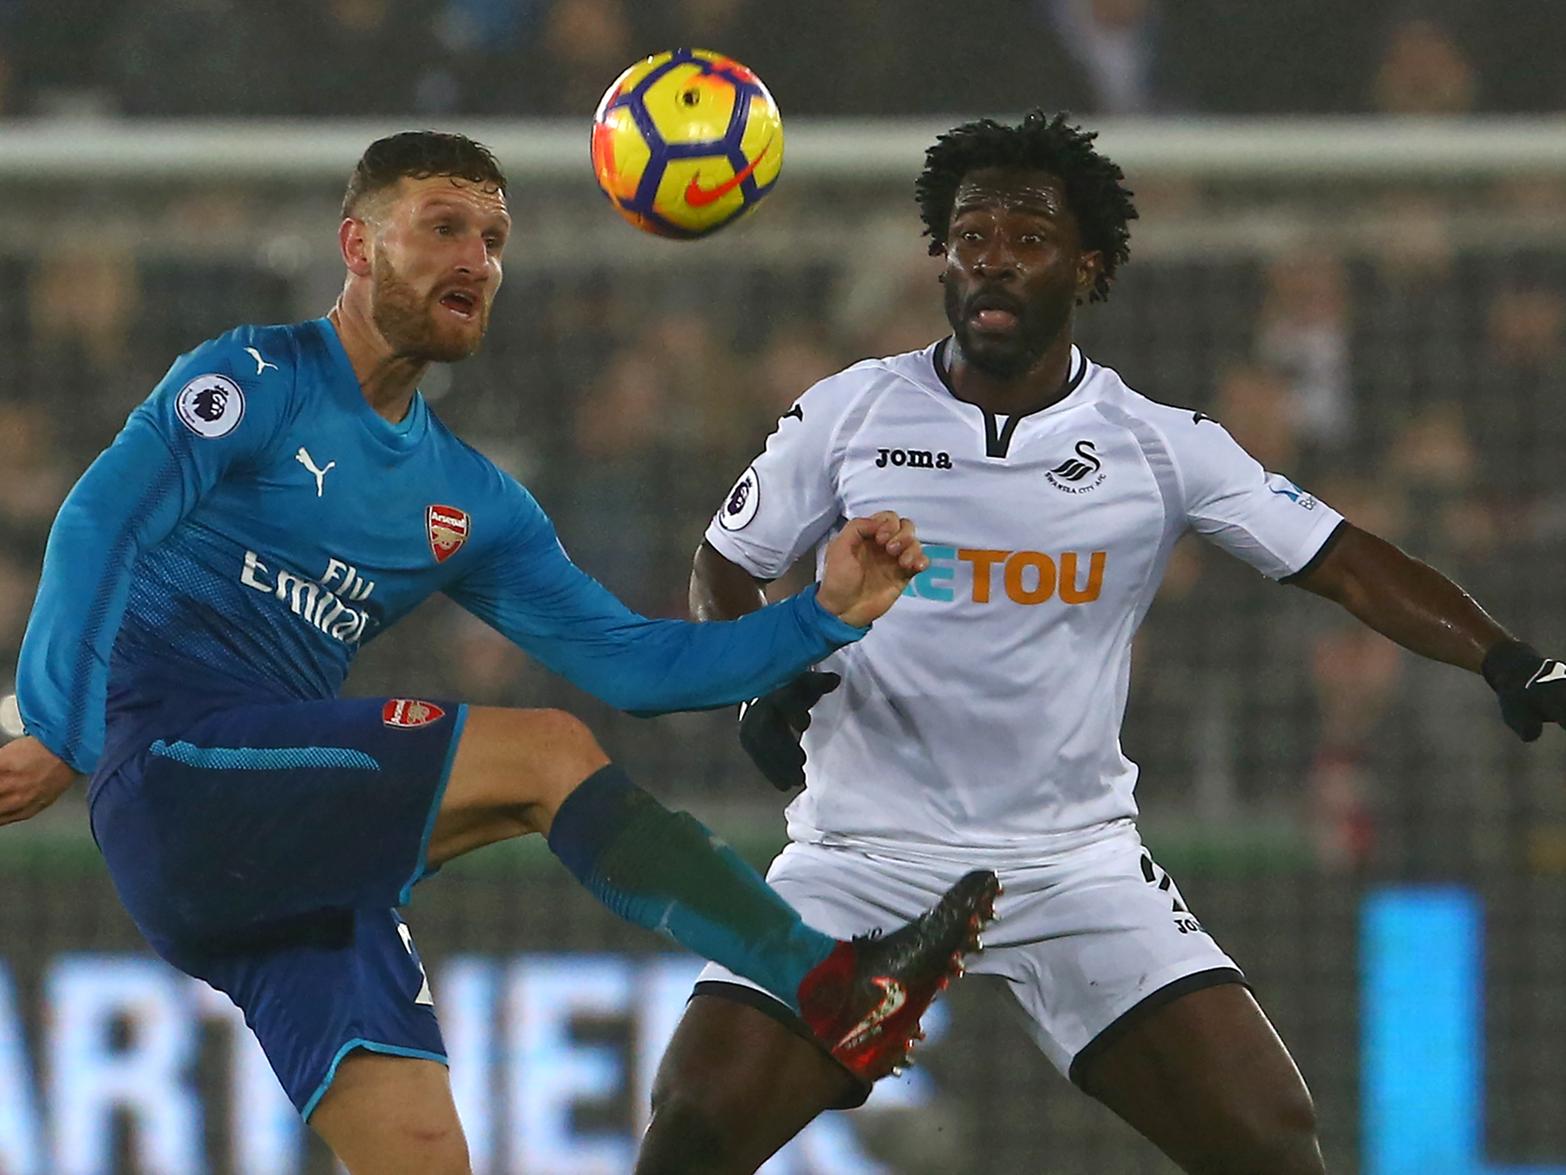 Bristol City are rumoured to be pursuing a move for ex-Swansea City striker Wilfried Bony, as they look to secure cover for loanee Benik Afobe, who has been ruled out for the rest of the season with injury. (The 72)